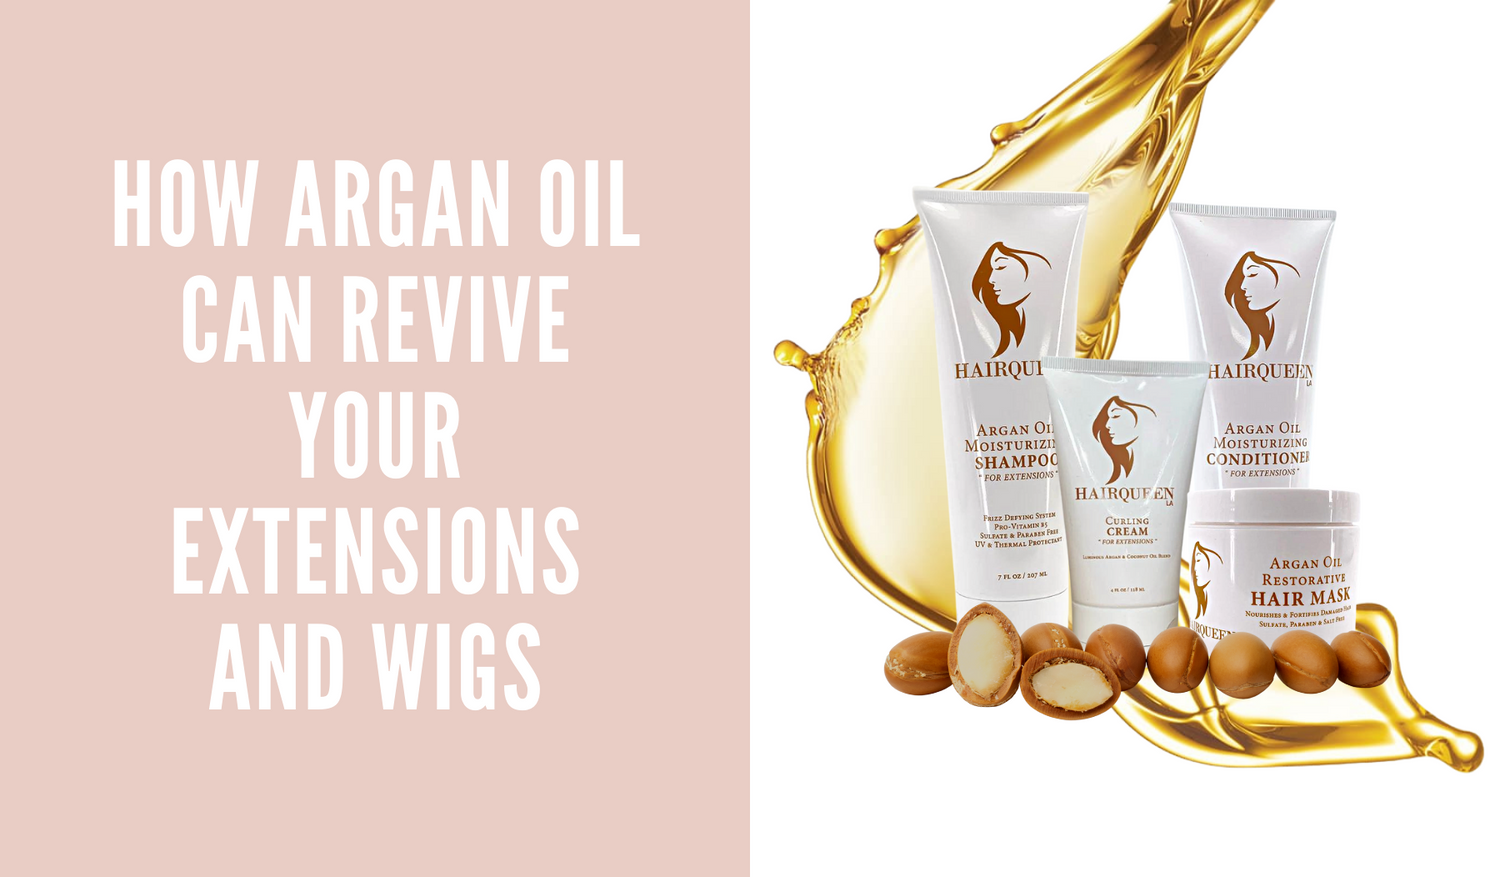 How Argan Oil Can Revive Your Extensions and Wigs